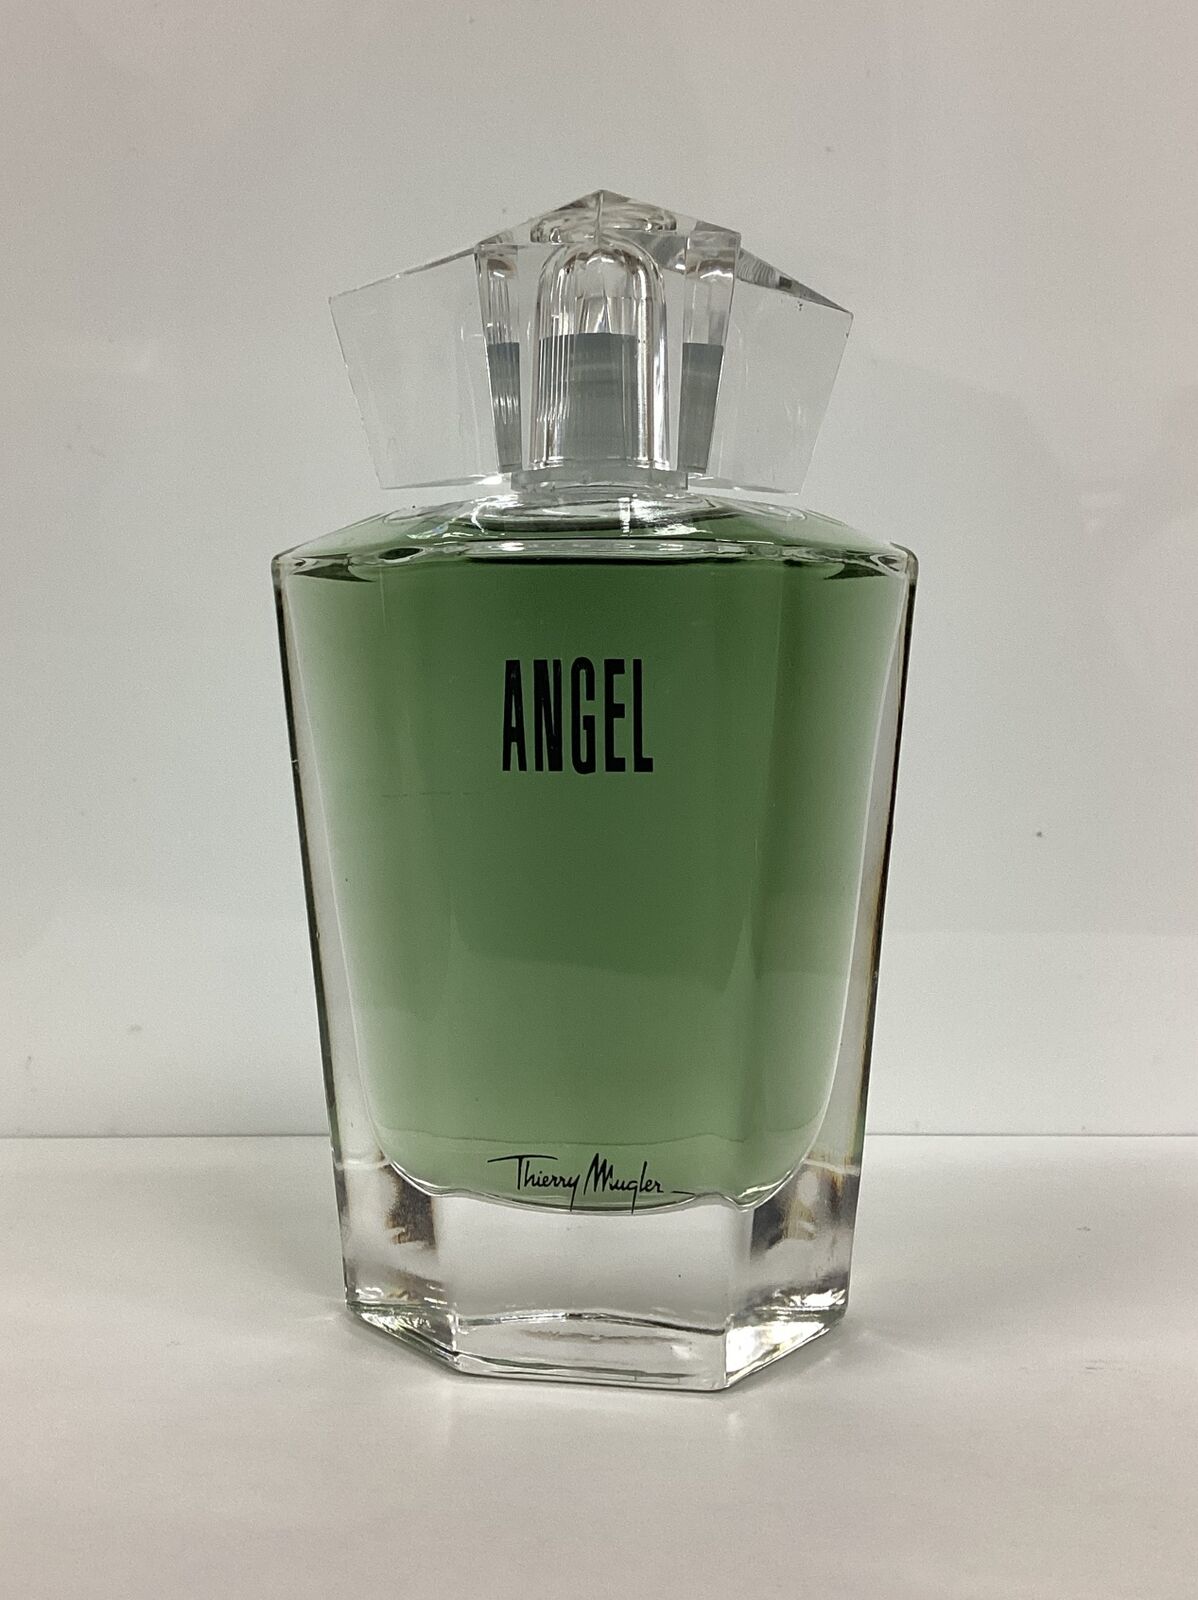 Thierry Mugler Angel EDP refill bottle, 1.7 oz OLD FORMULA As Pictured